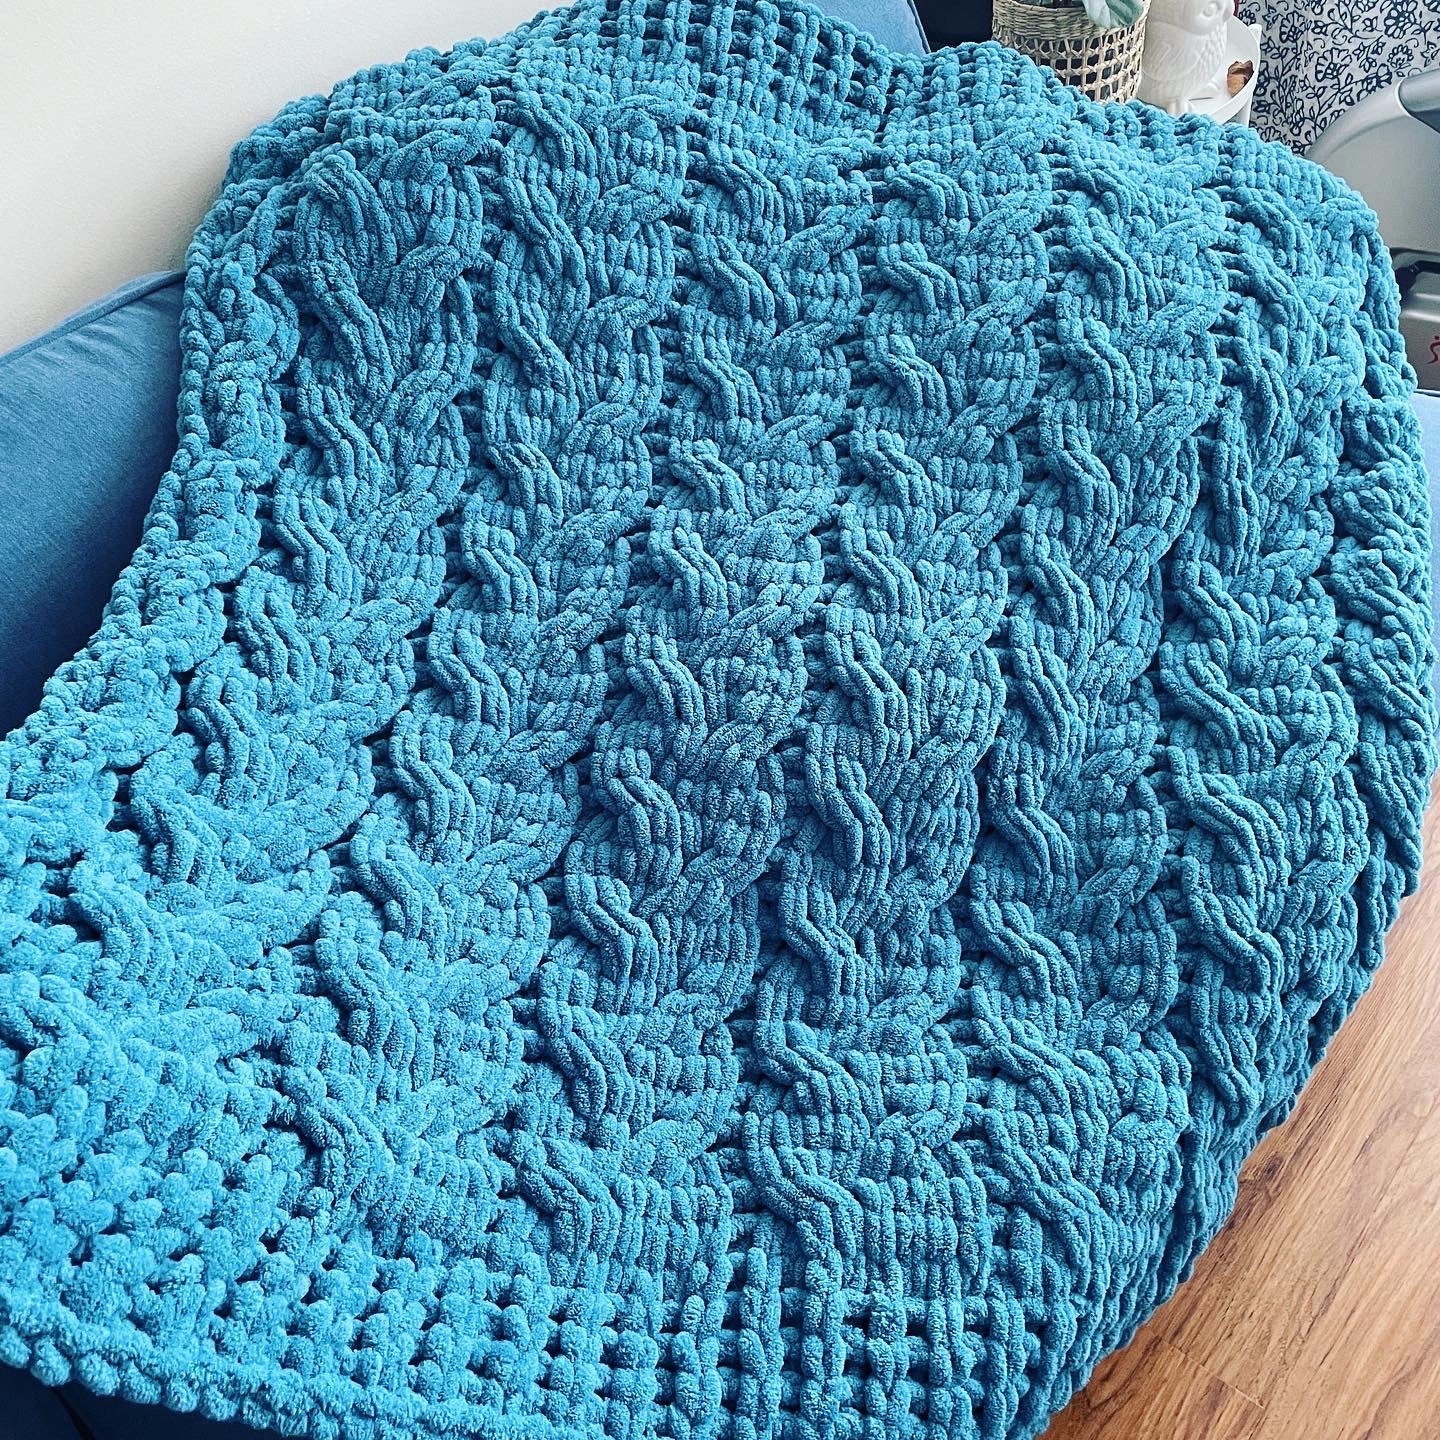 PATTERN: Crooked Cable Blanket - ILoveMyBlanket